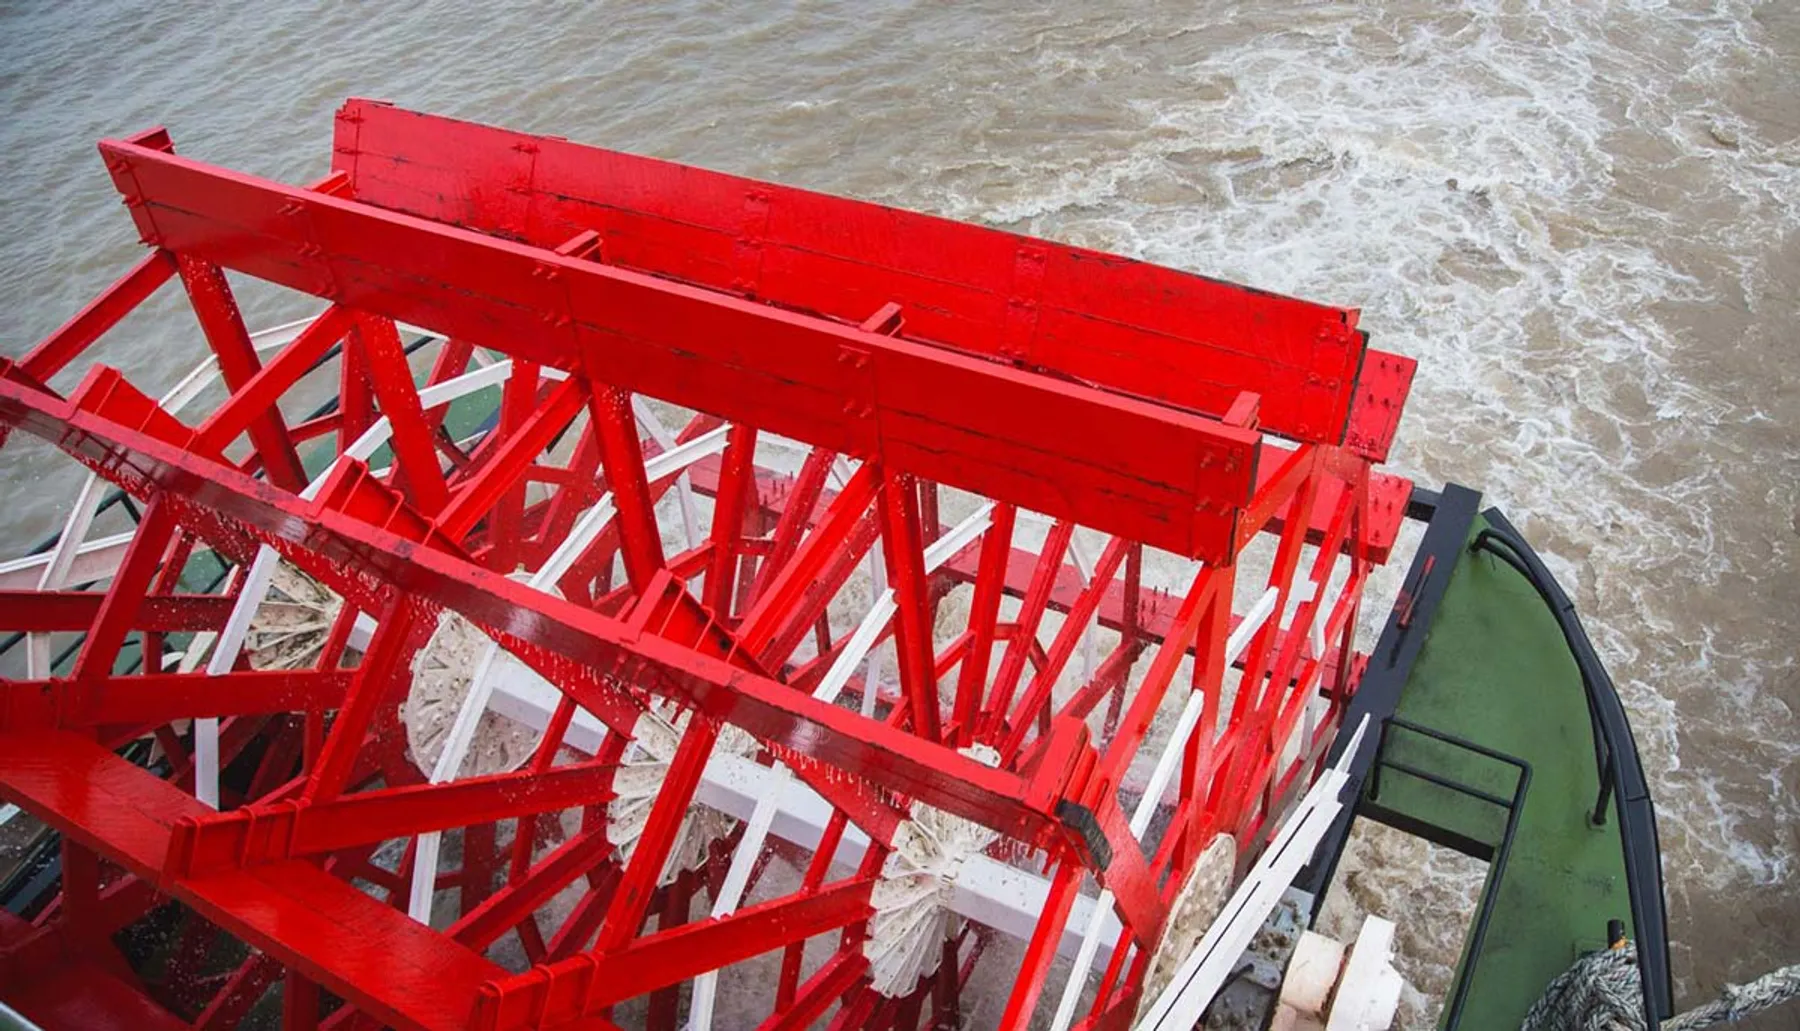 A vivid red structure, possibly a part of a navigational marker or buoy, is partially submerged in churned, muddy waters, seen from above.